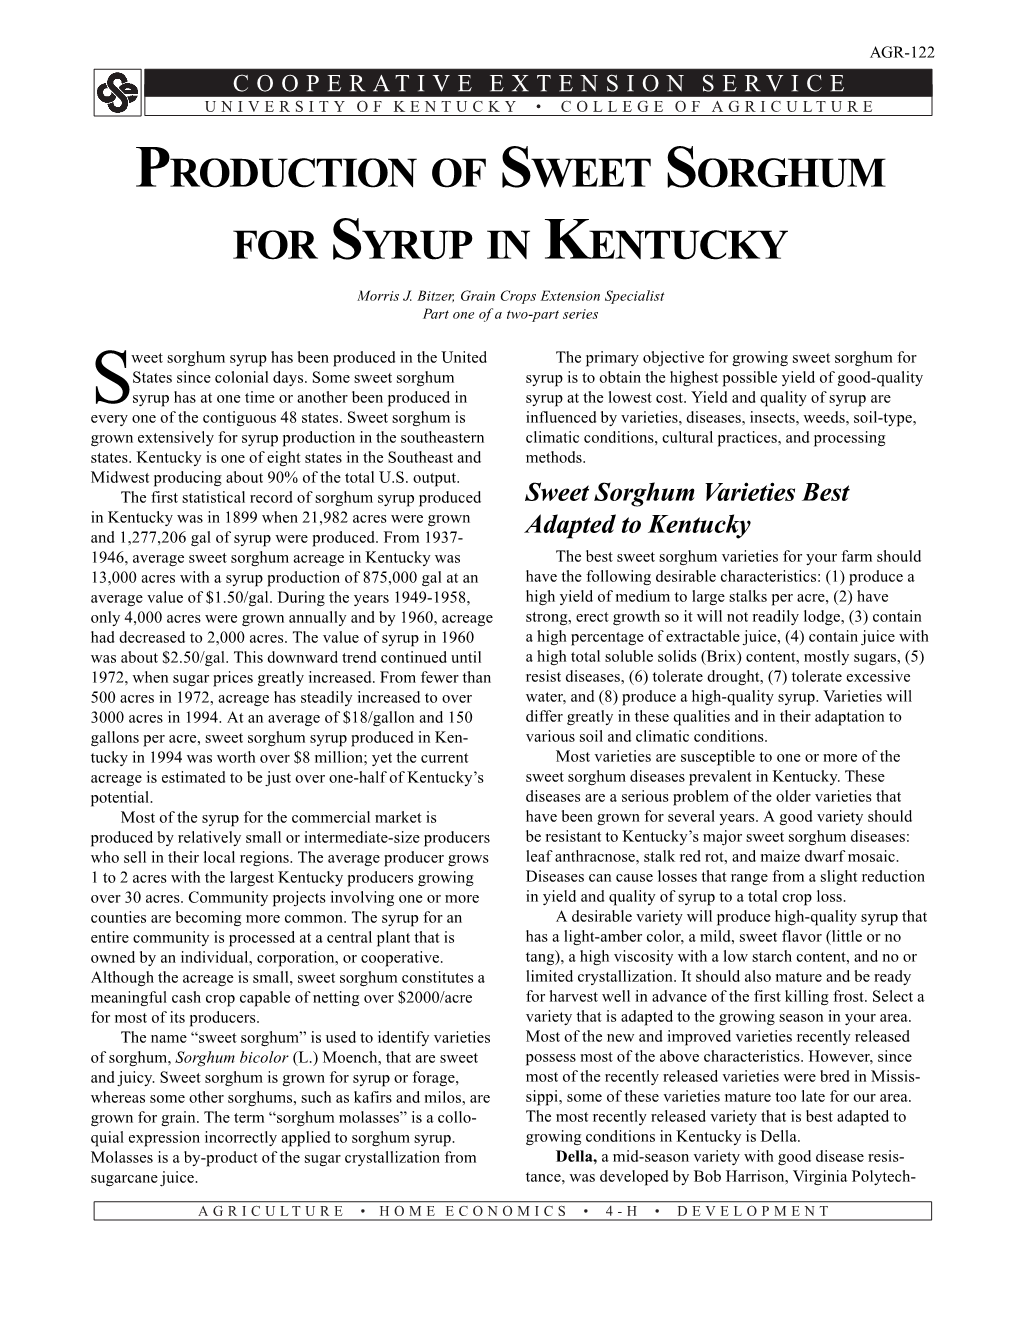 Agr-122: Production of Sweet Sorghum for Syrup in Kentucky